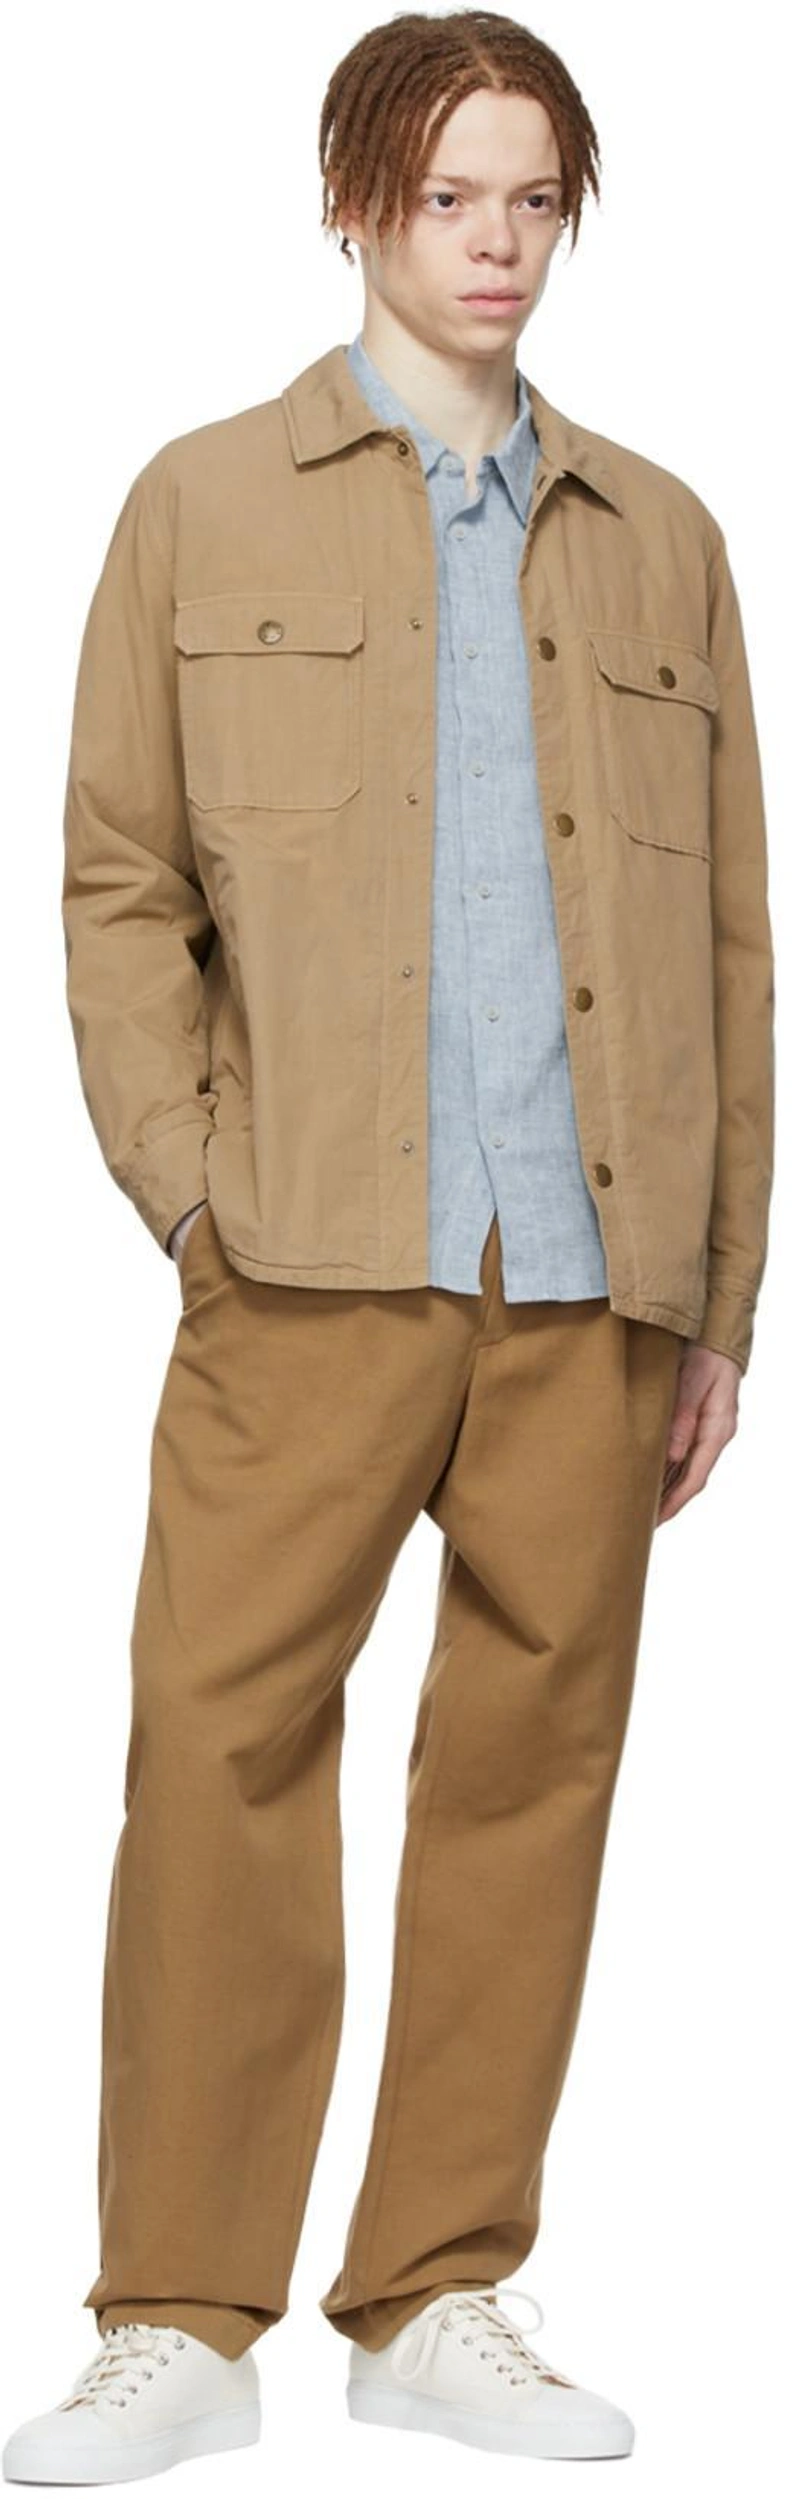 SSENSE's Post | 搭配: Apc Brown Eddy Trousers In Cab Camel；Apc Vincent Logo-emboridered Linen Shirt In Blue；Apc Beige Alex Jacket In Bac Beige Fonce